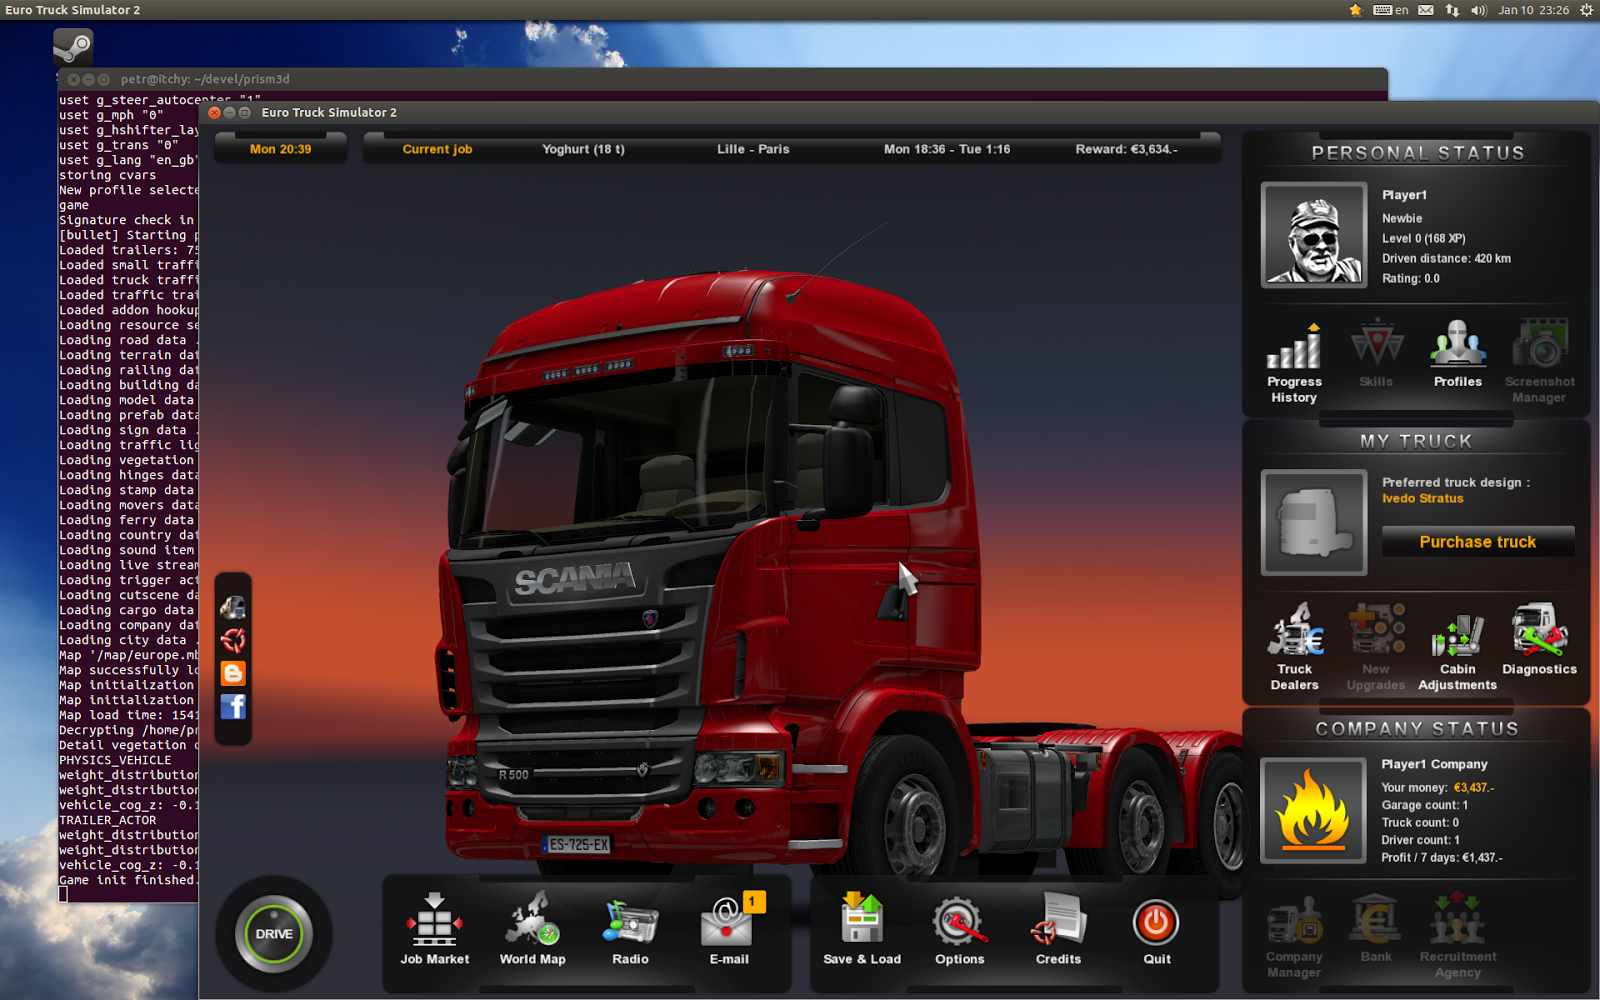 Steam-for-Linux-Has-a-50-Discount-for-Euro-Truck-Simulator-2-2.png